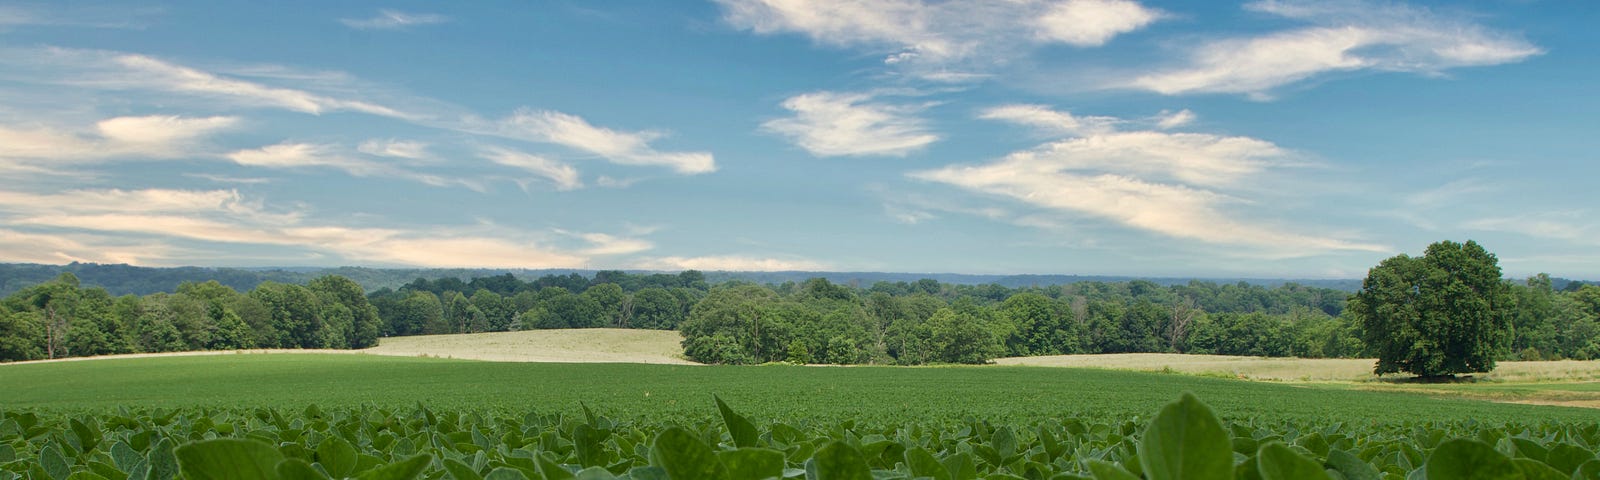 an expanse of green soybean fields under a blue sky dotted with clouds